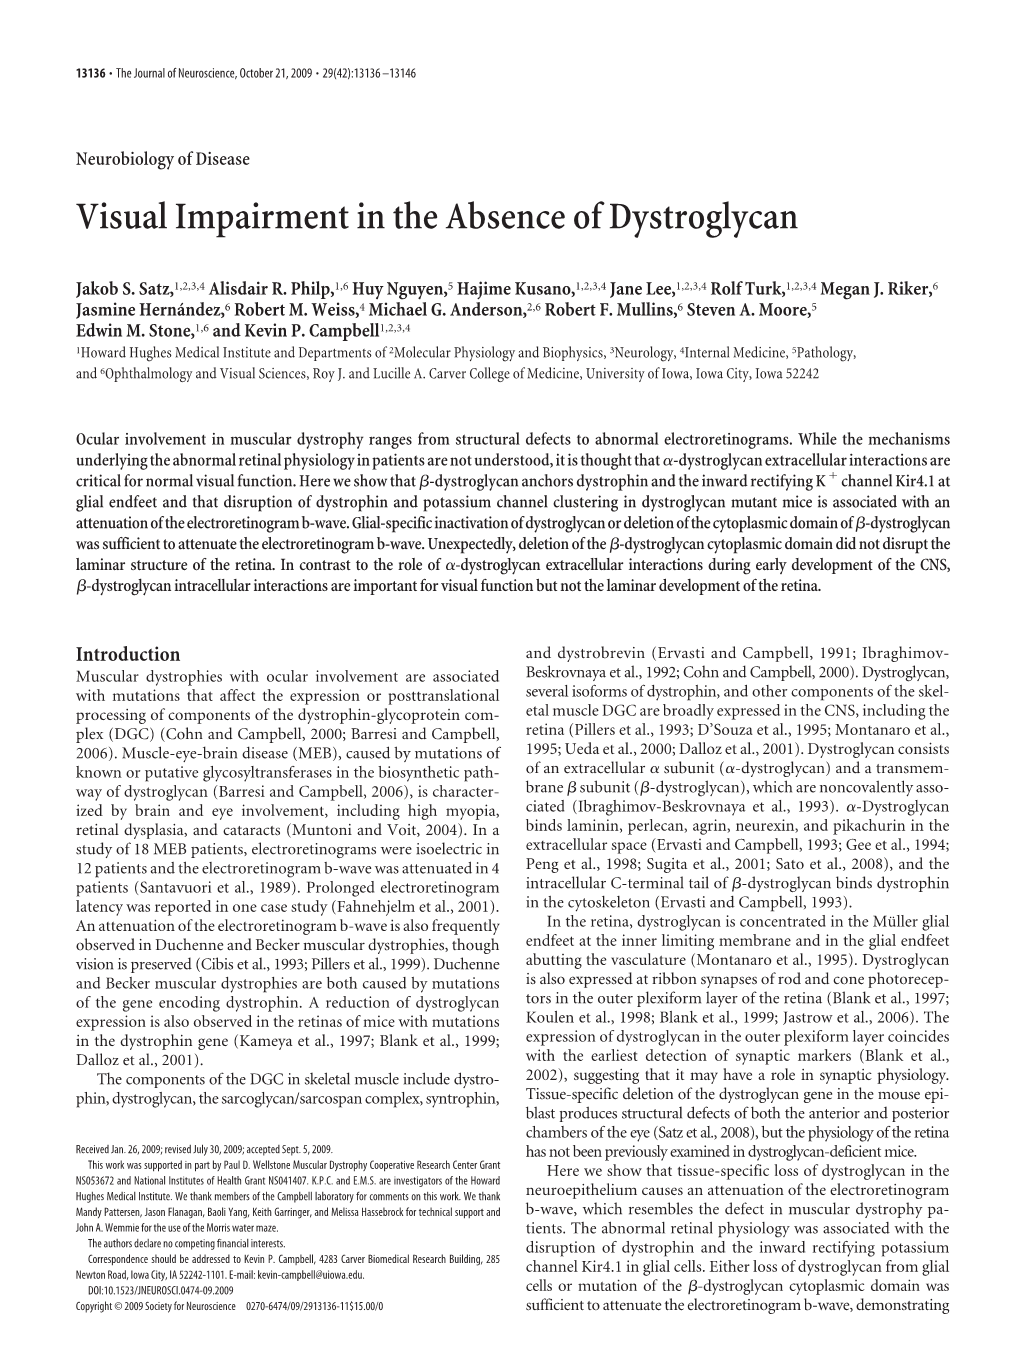 Visual Impairment in the Absence of Dystroglycan